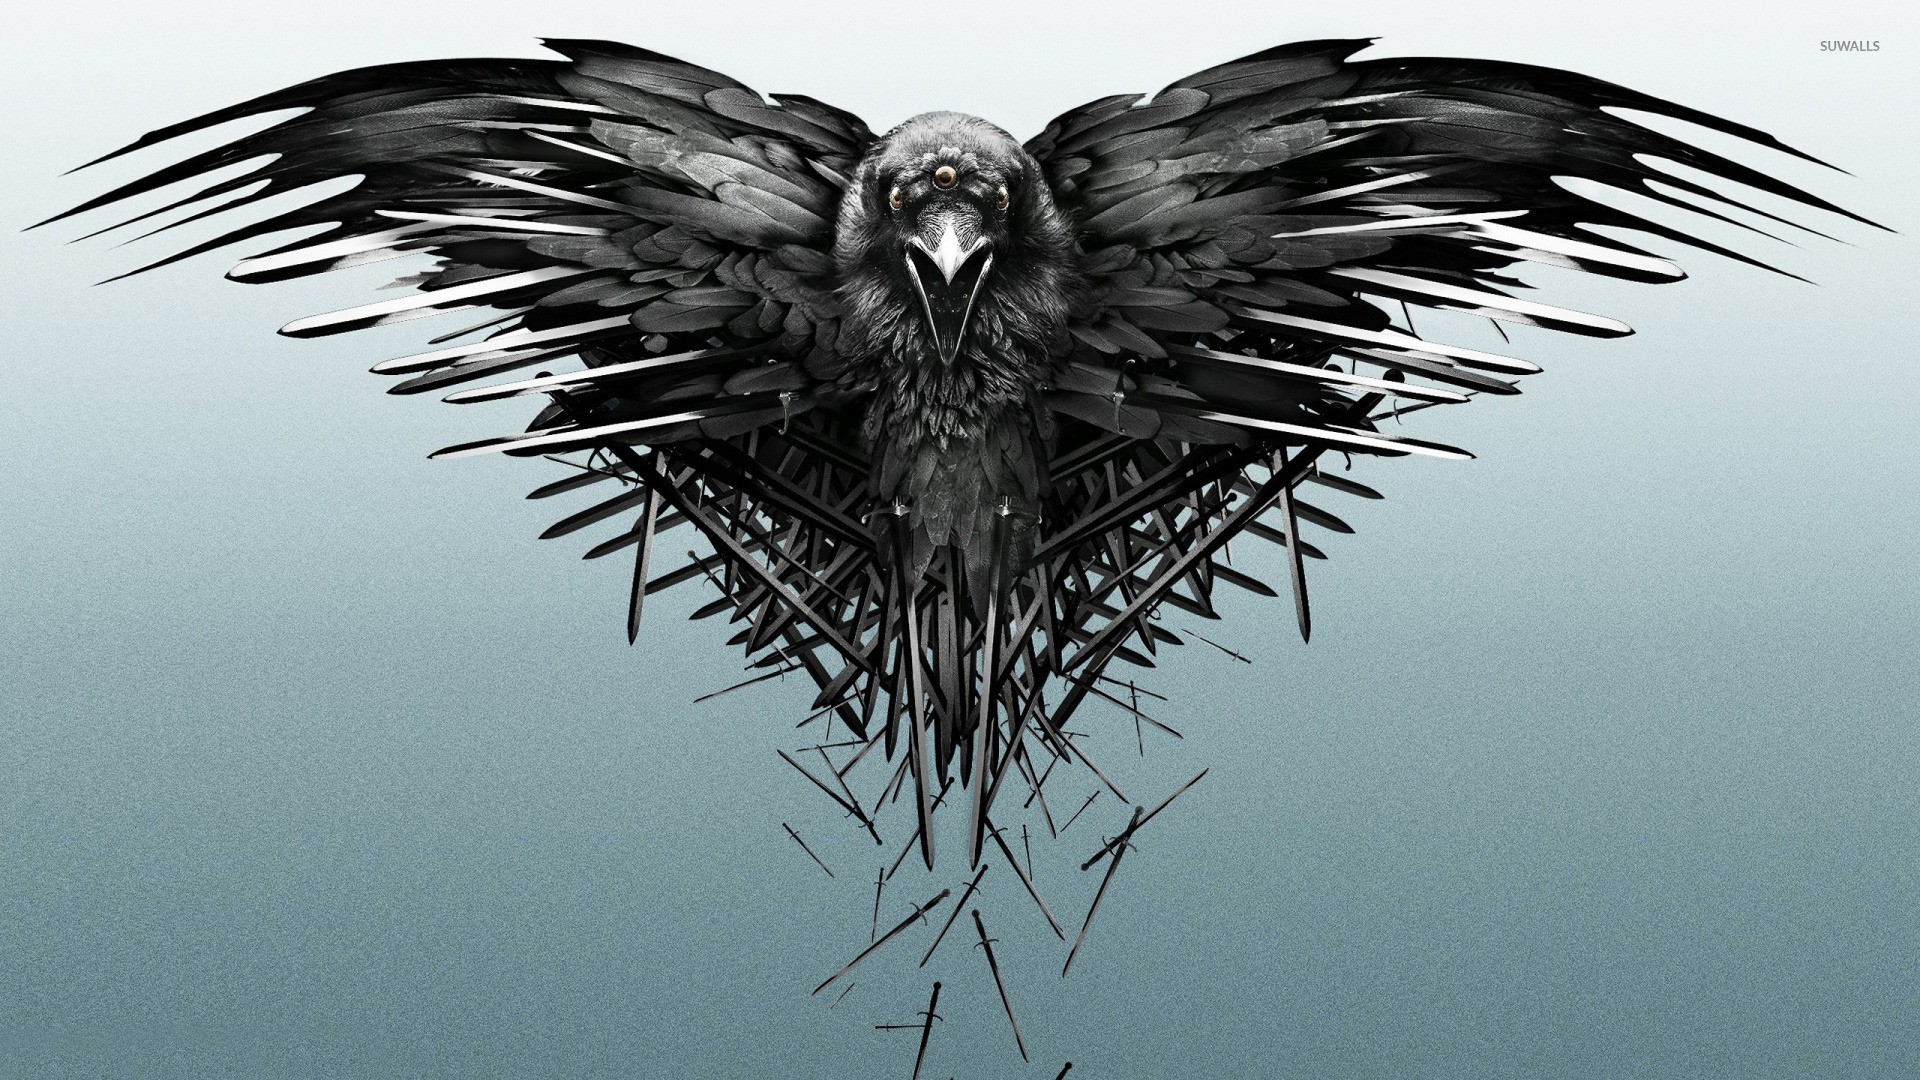 Game of Thrones wallpaper 1920x1080 ·① Download free cool ...